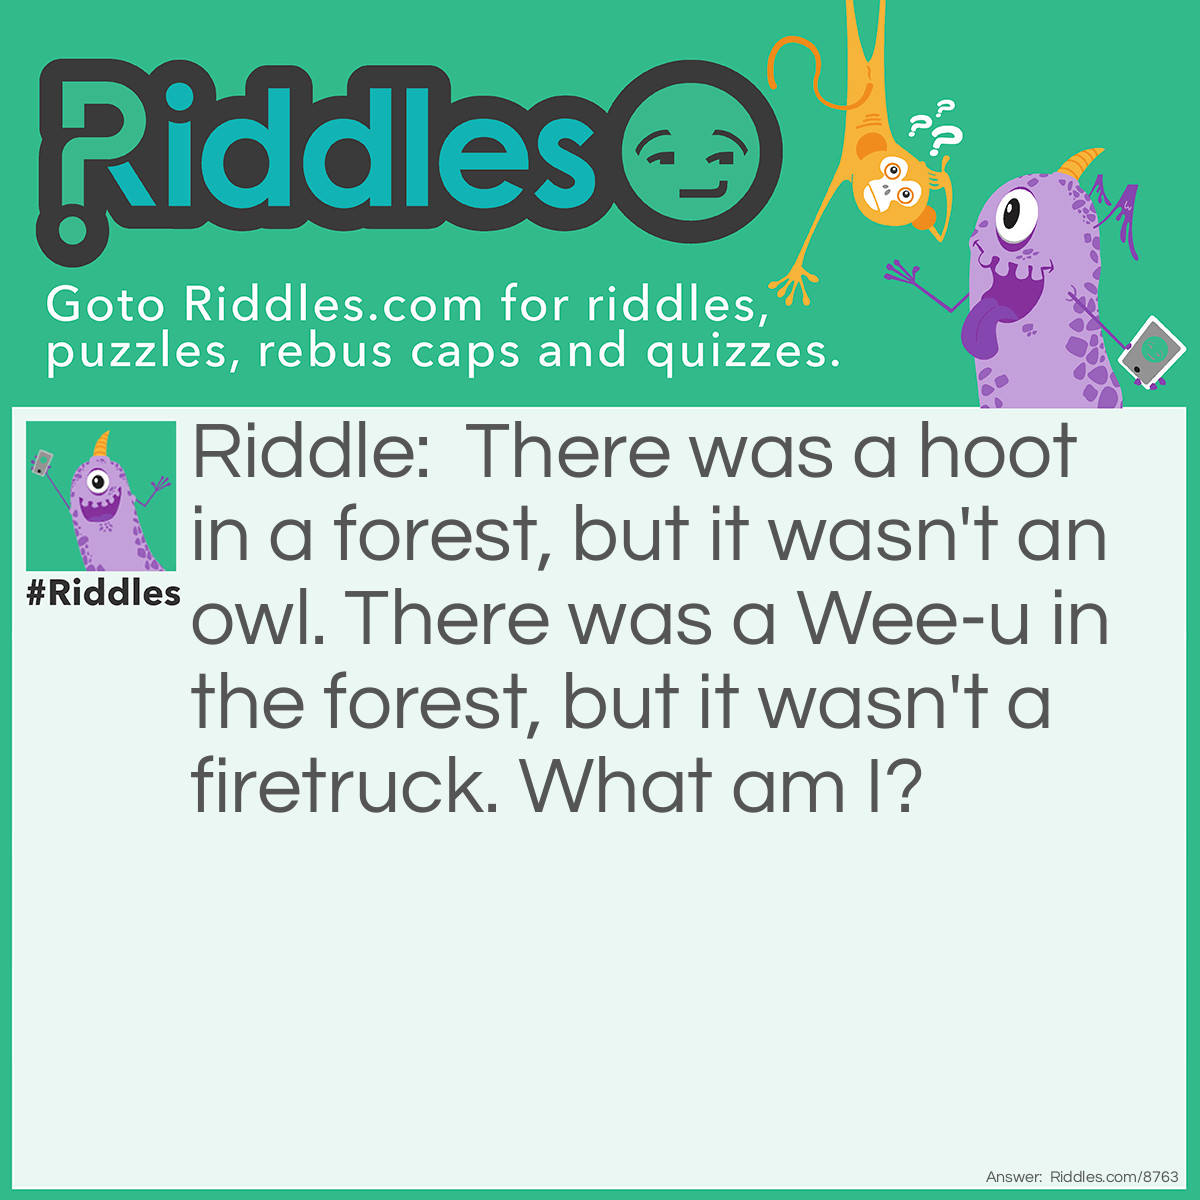 Riddle: There was a hoot in a forest, but it wasn't an owl. There was a Wee-u in the forest, but it wasn't a firetruck. What am I? Answer: A lyrebird (surprised you, eh?)